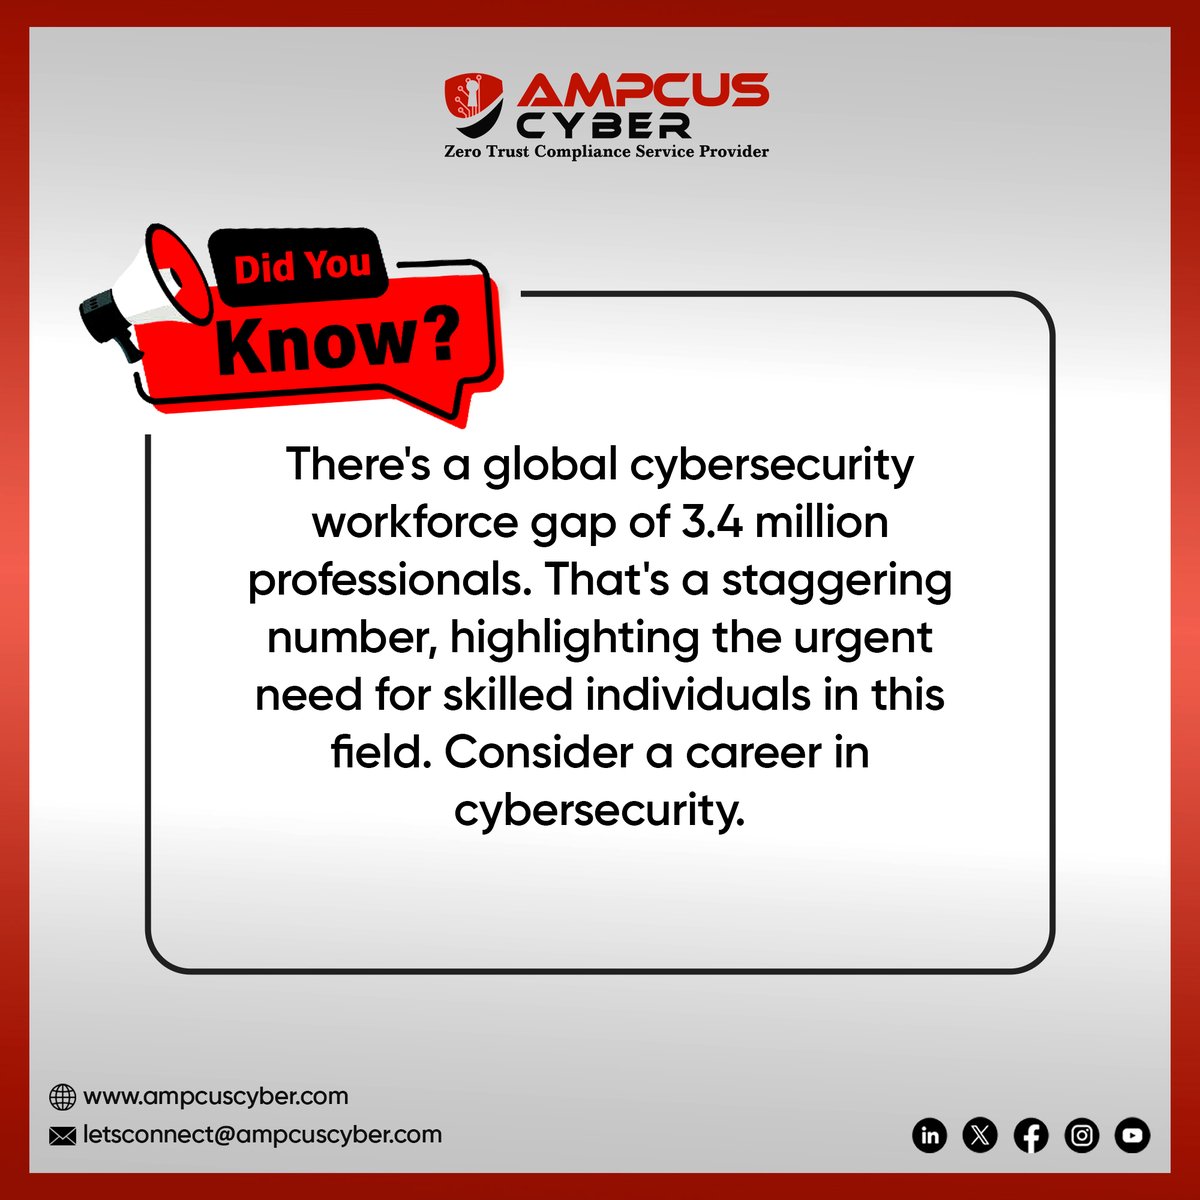 💡#Didyouknow that there's a global cybersecurity   workforce gap of 3.4 million professionals. That's a staggering number, highlighting the urgent need for skilled individuals in this field. Consider a career in cybersecurity. 
 
#ampcuscyber #didyouknowfacts #cybersecurity